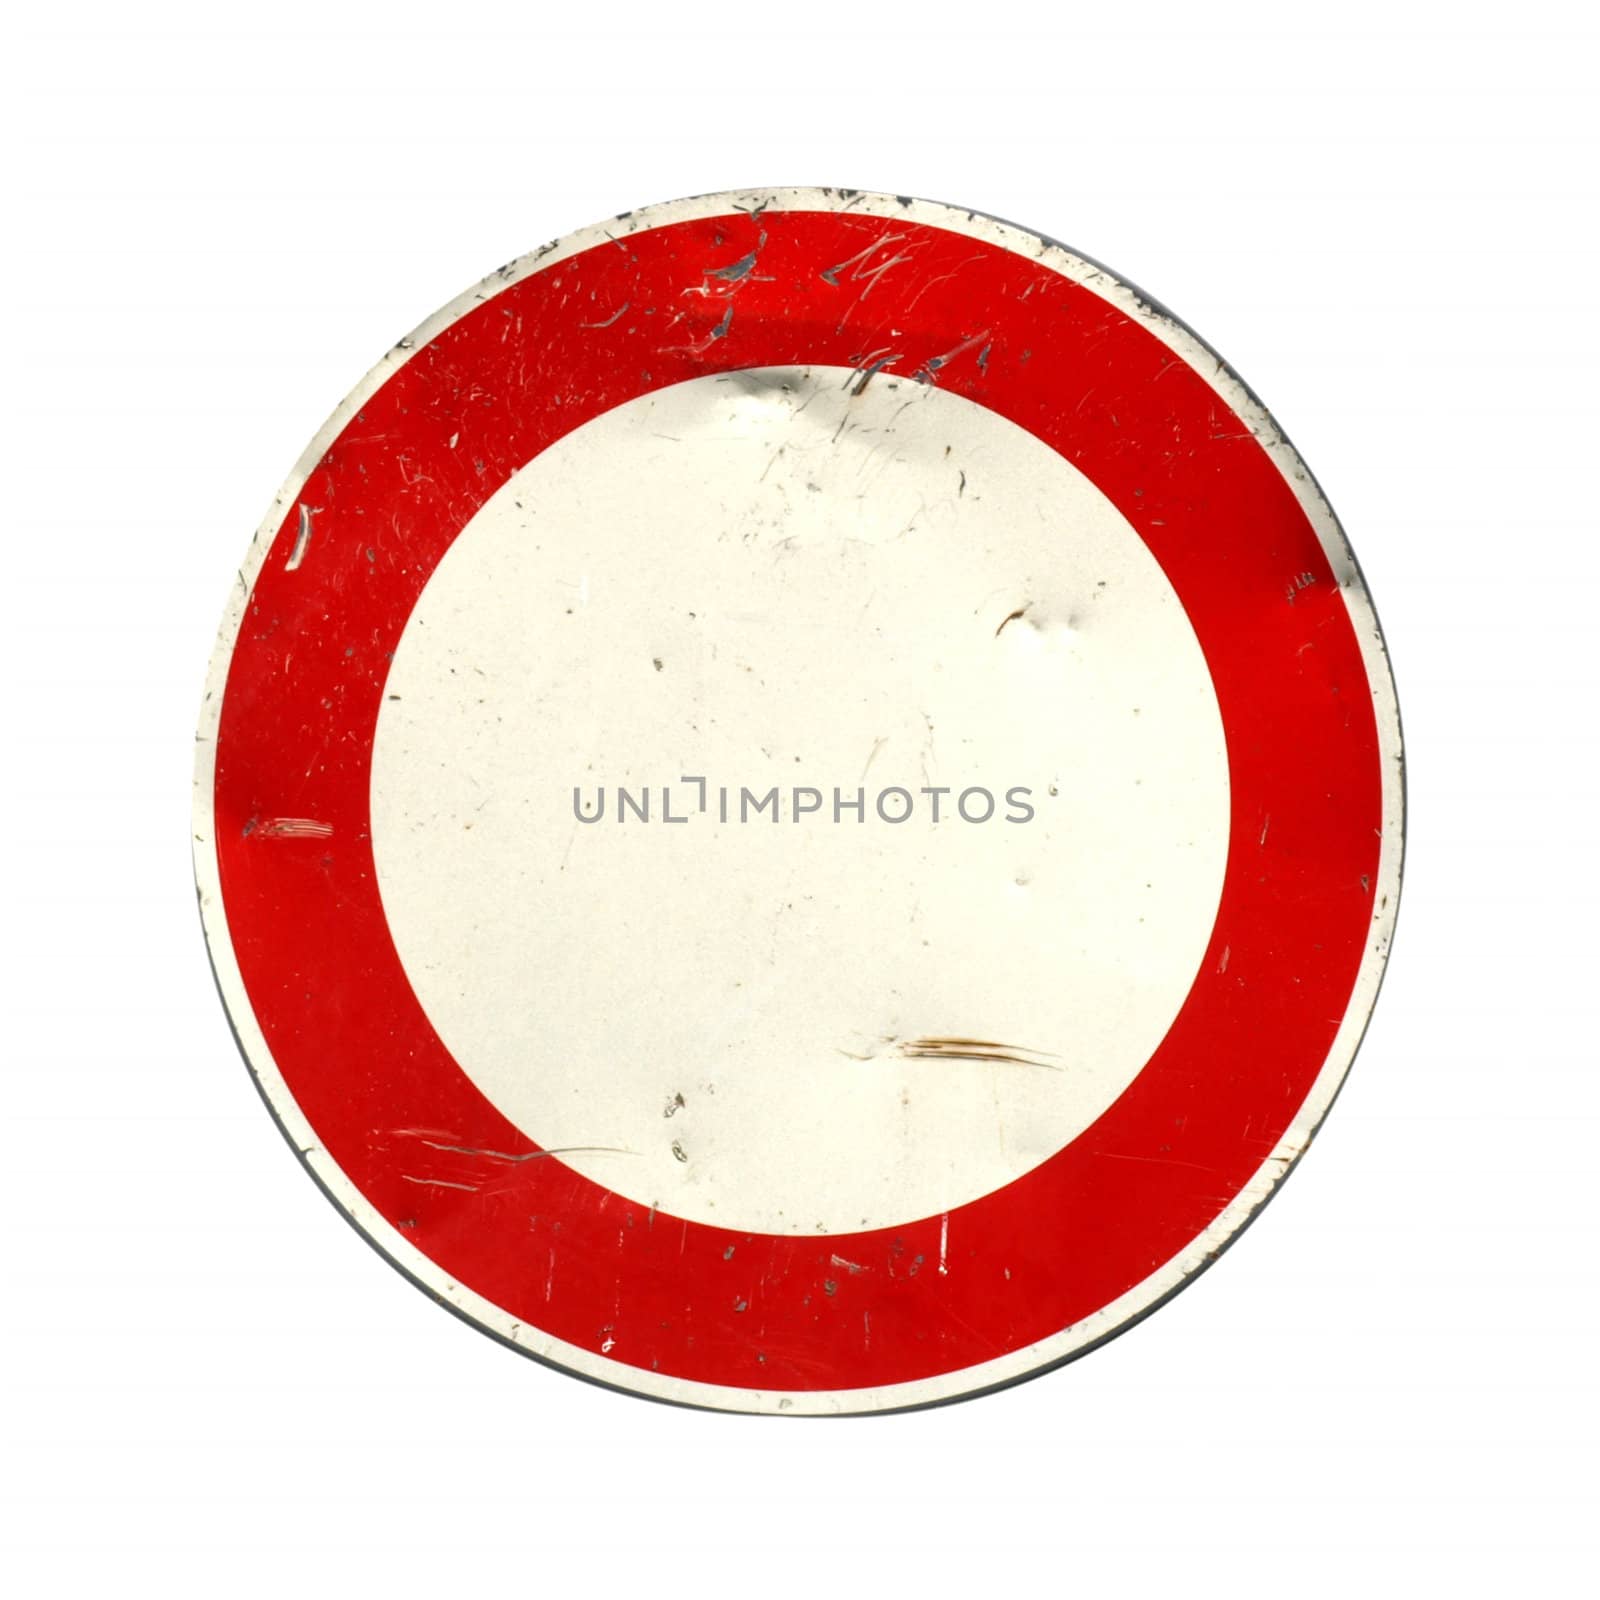 Grunge worn traffic sign isolated over a white background